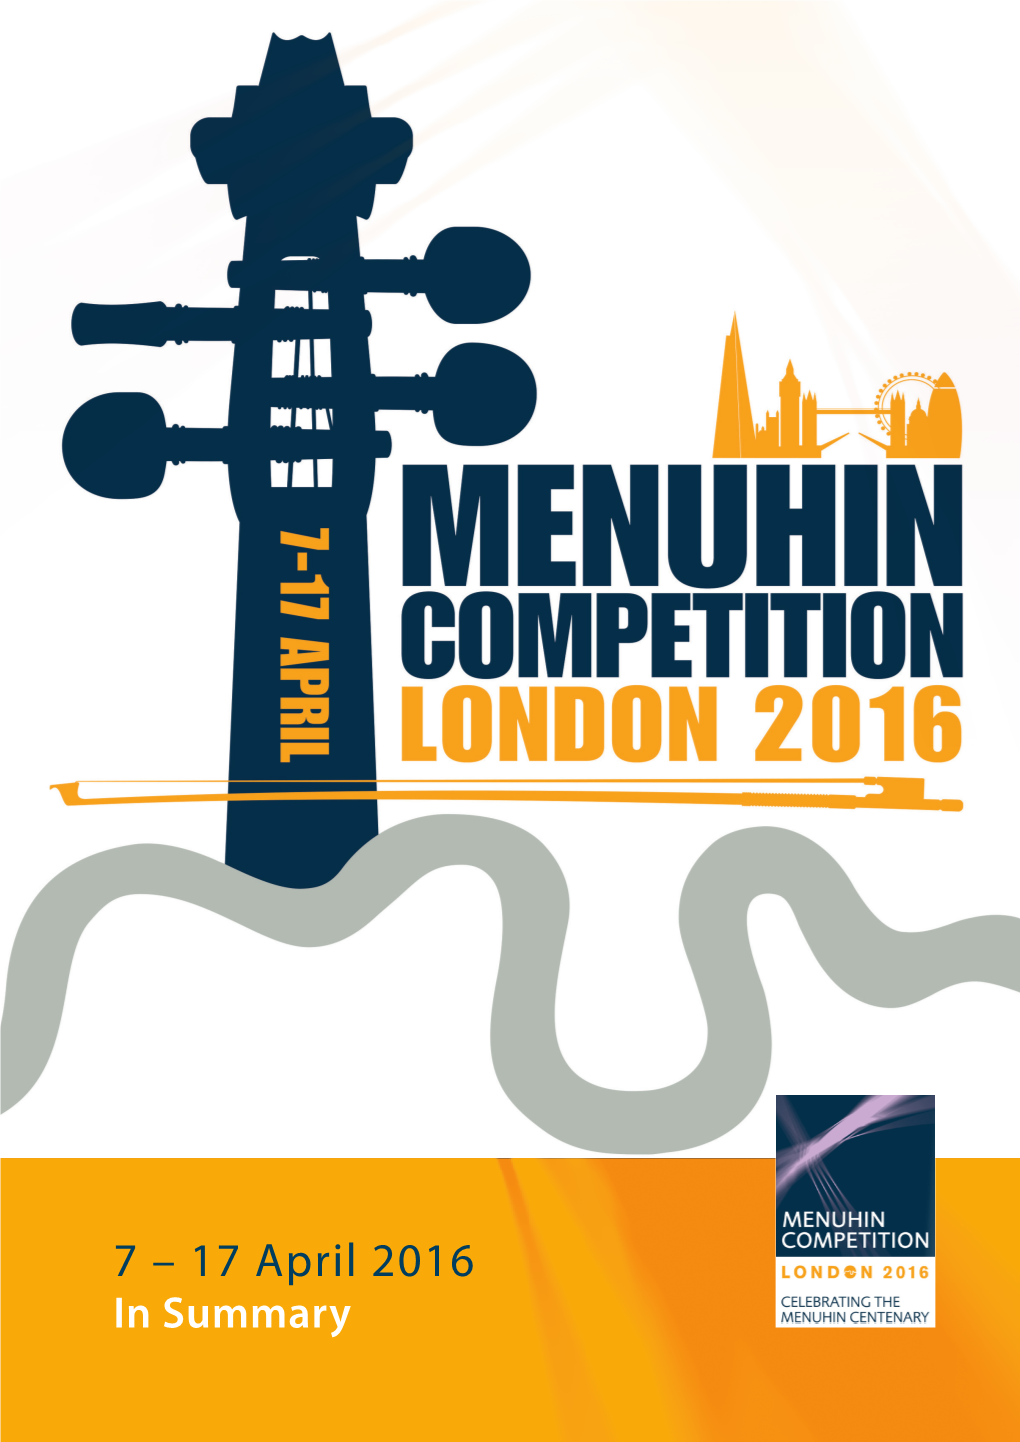 17 April 2016 in Summary the Menuhin Competition London 2016 in Numbers